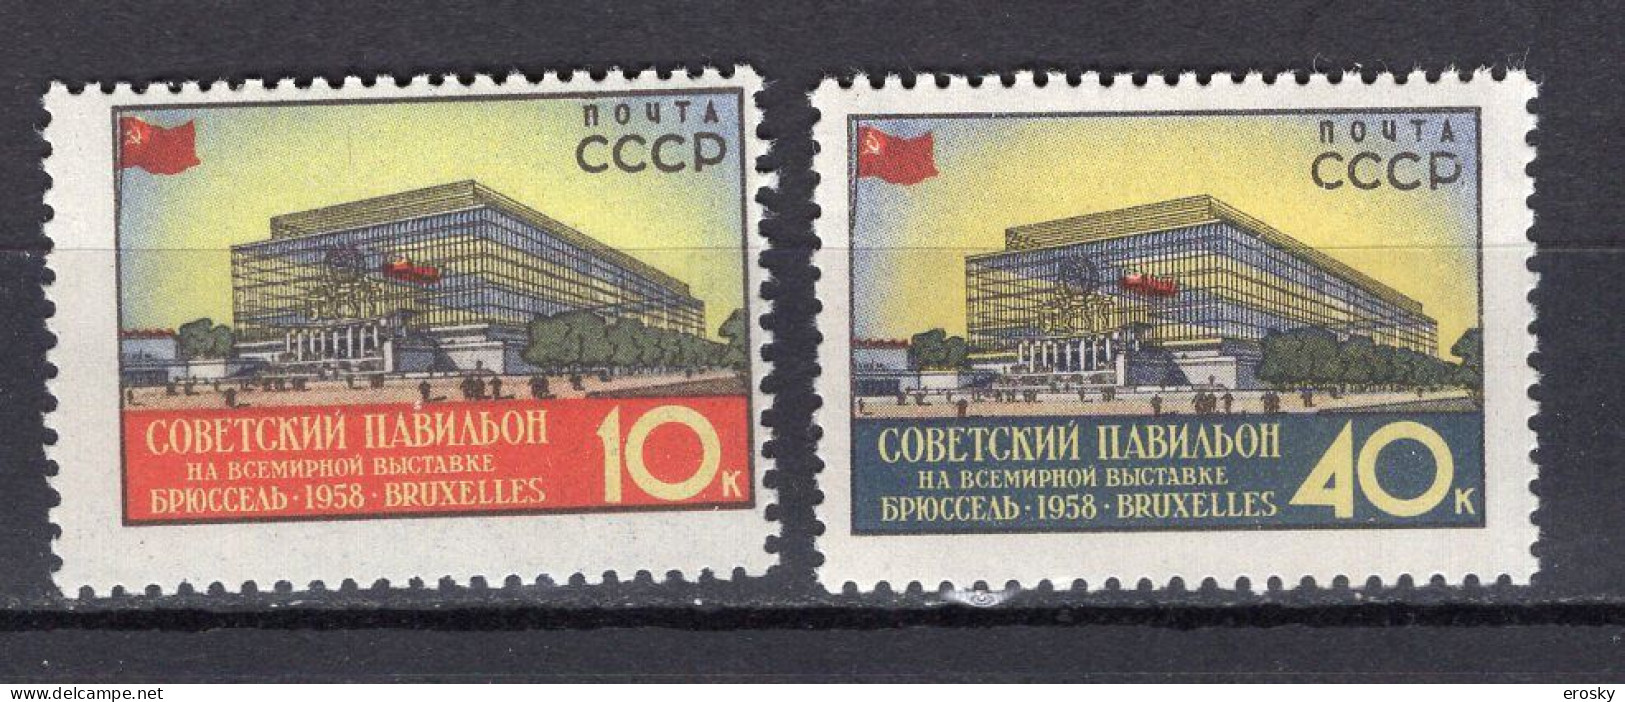 S5930 - RUSSIE RUSSIA Yv N°2035/36 ** EXPO BRUXELLES - Ungebraucht